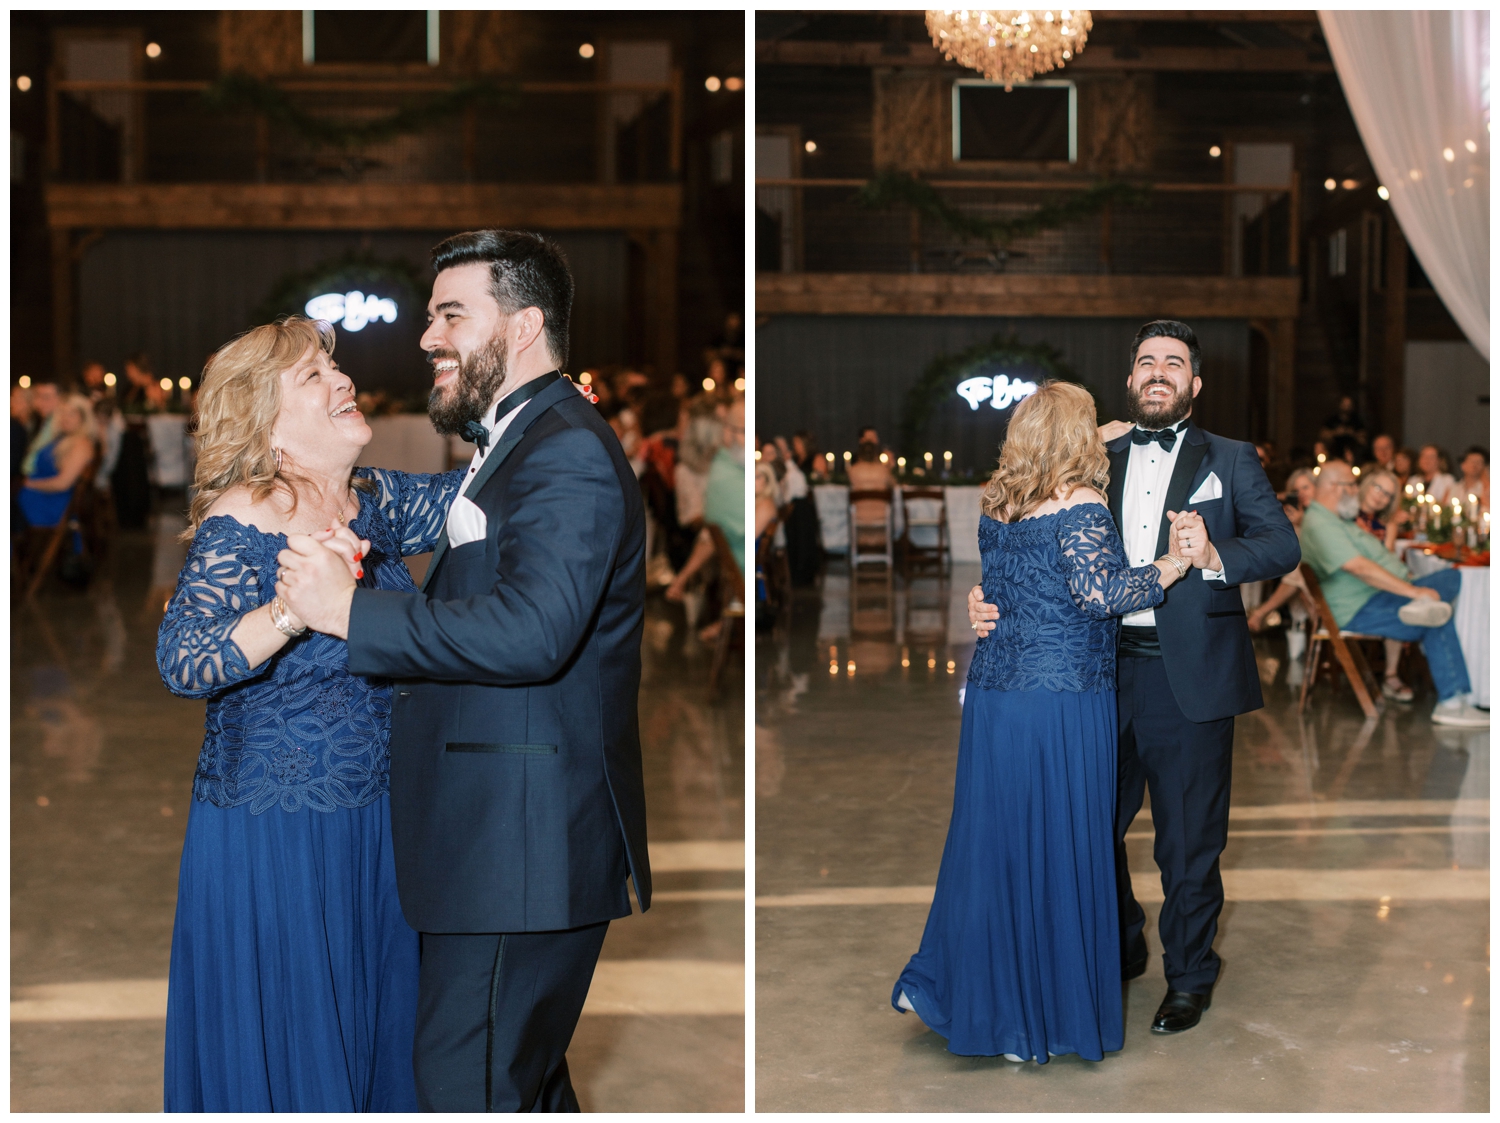 Peach Creek Ranch wedding reception hall with groom and mother dancing together